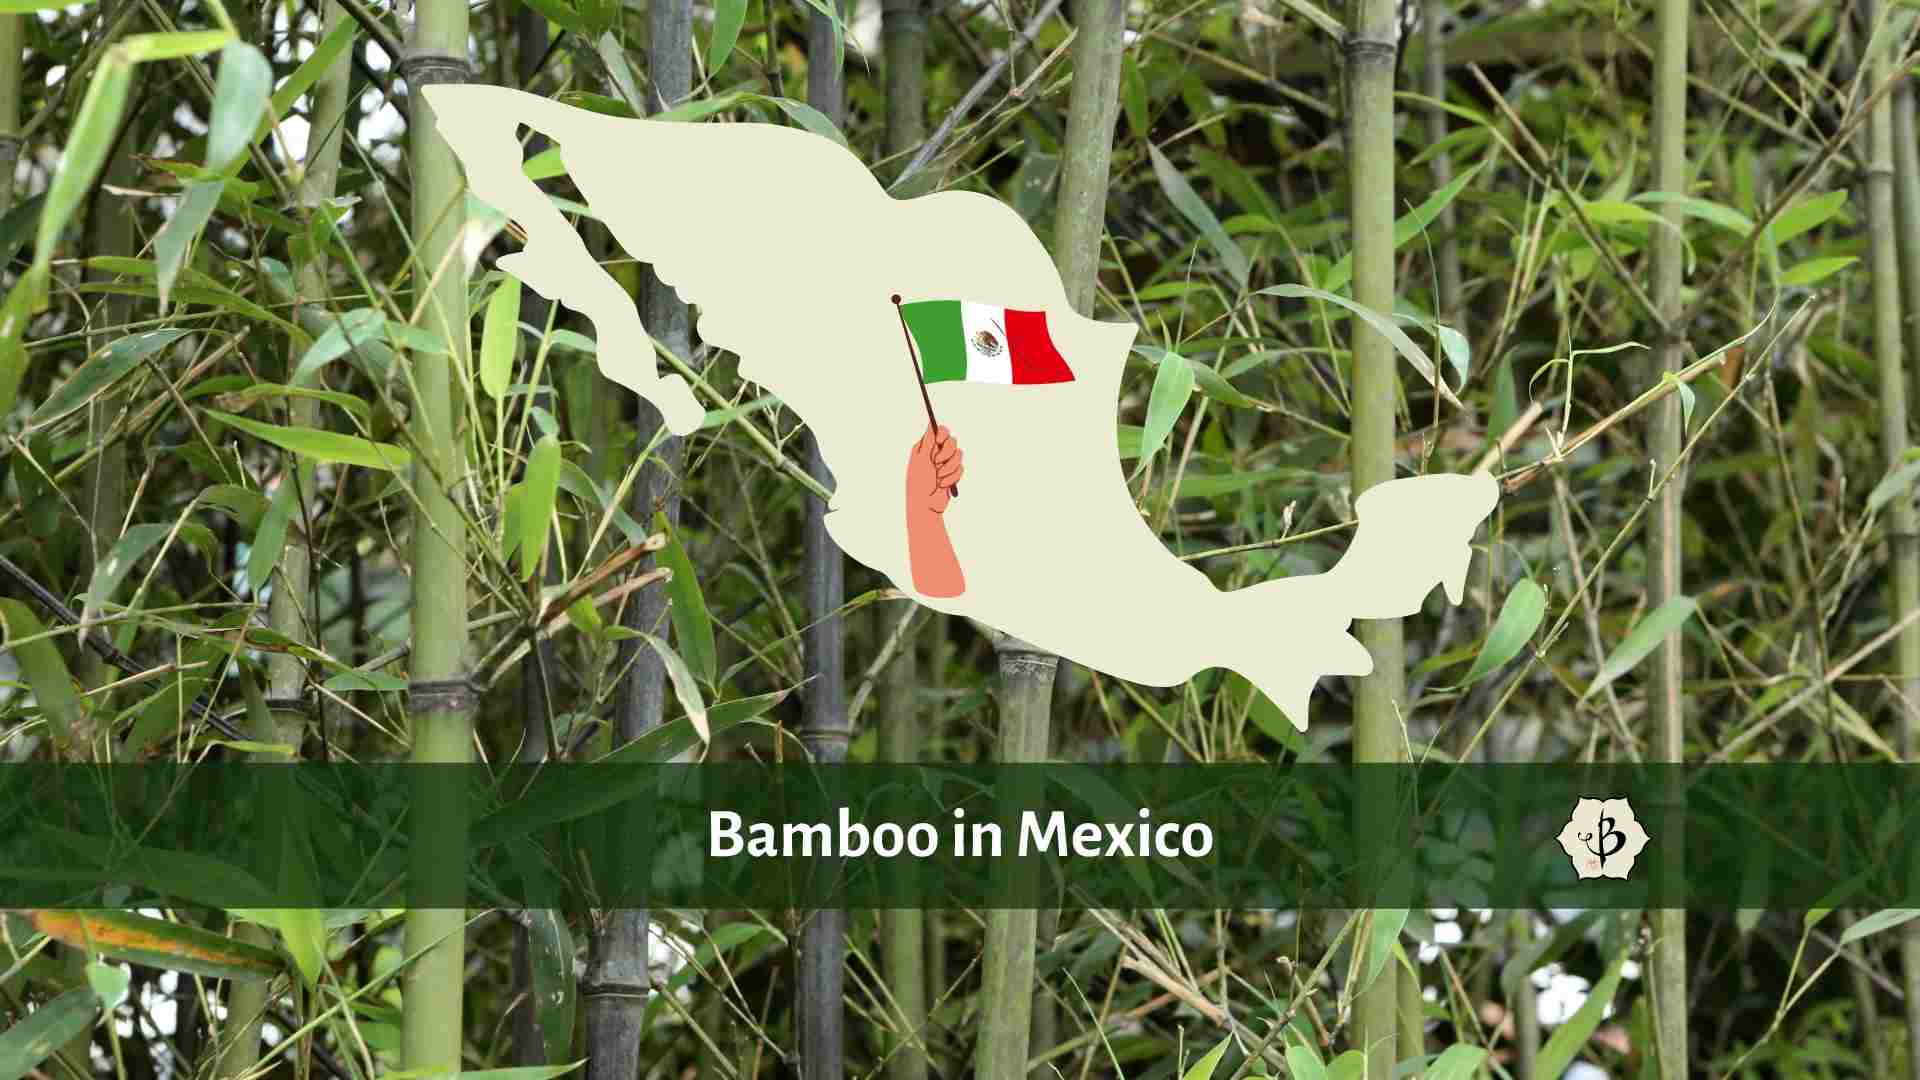 Find Bamboo in Mexico